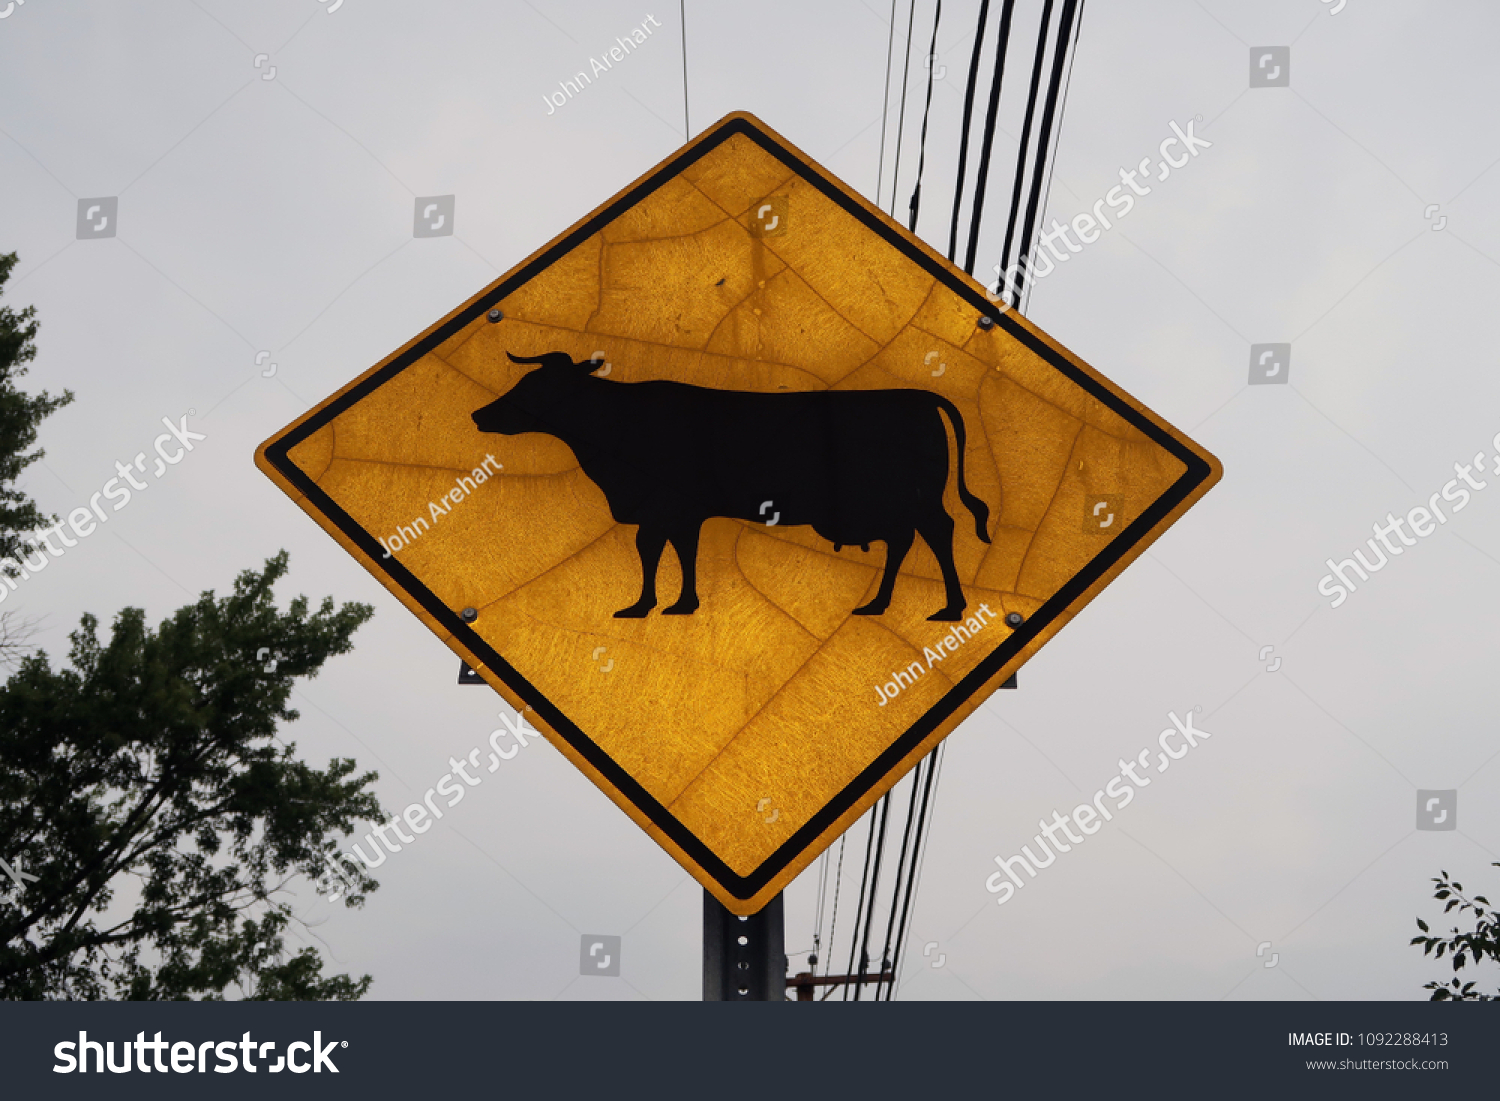 Low angle of a street sign with the symbol of a cow on it.                                #1092288413